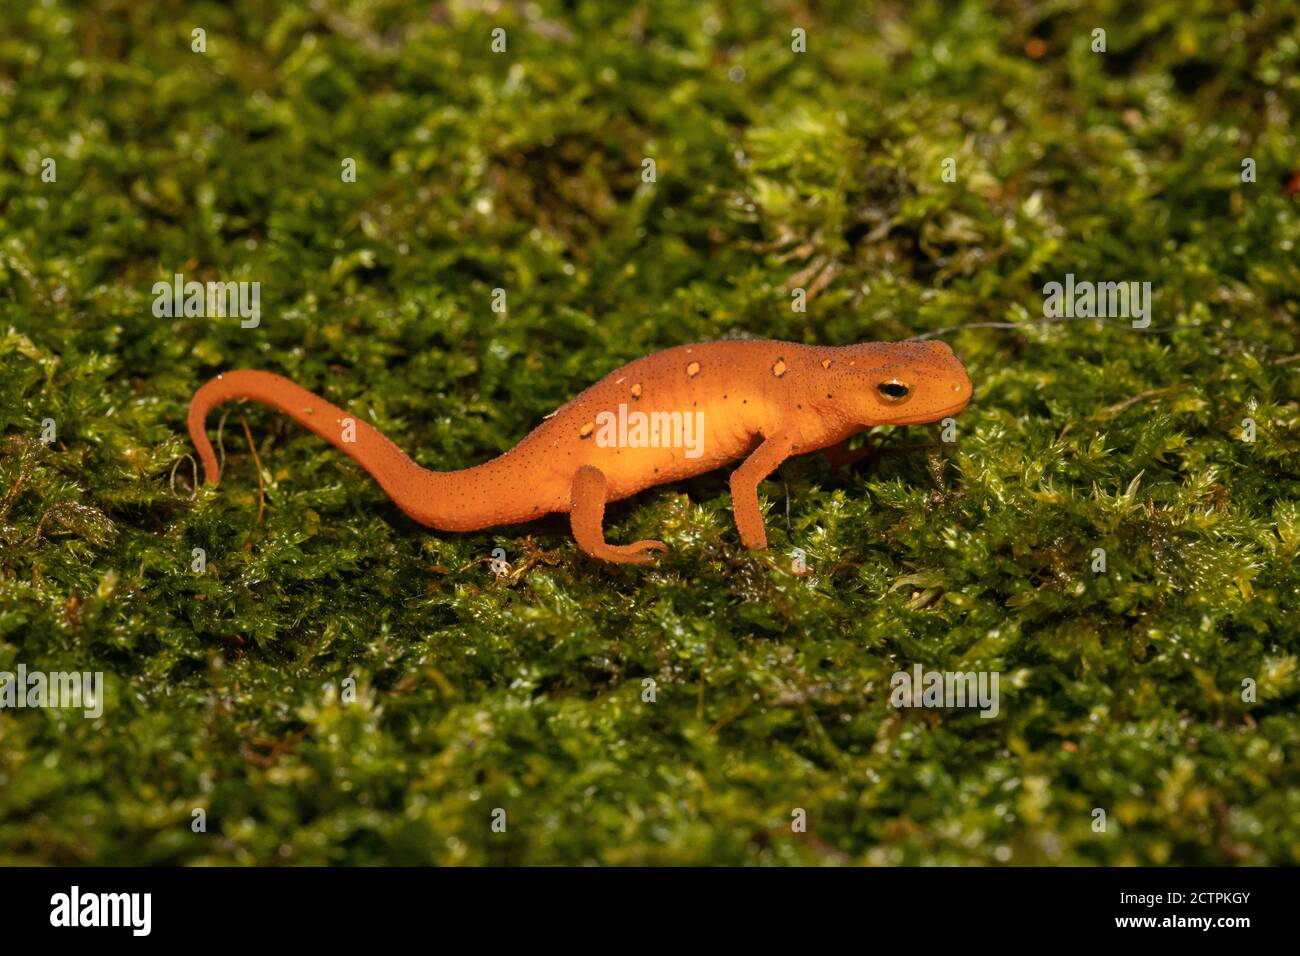 Eastern red-spotted newt - Notophthalmus viridescens Stock Photo